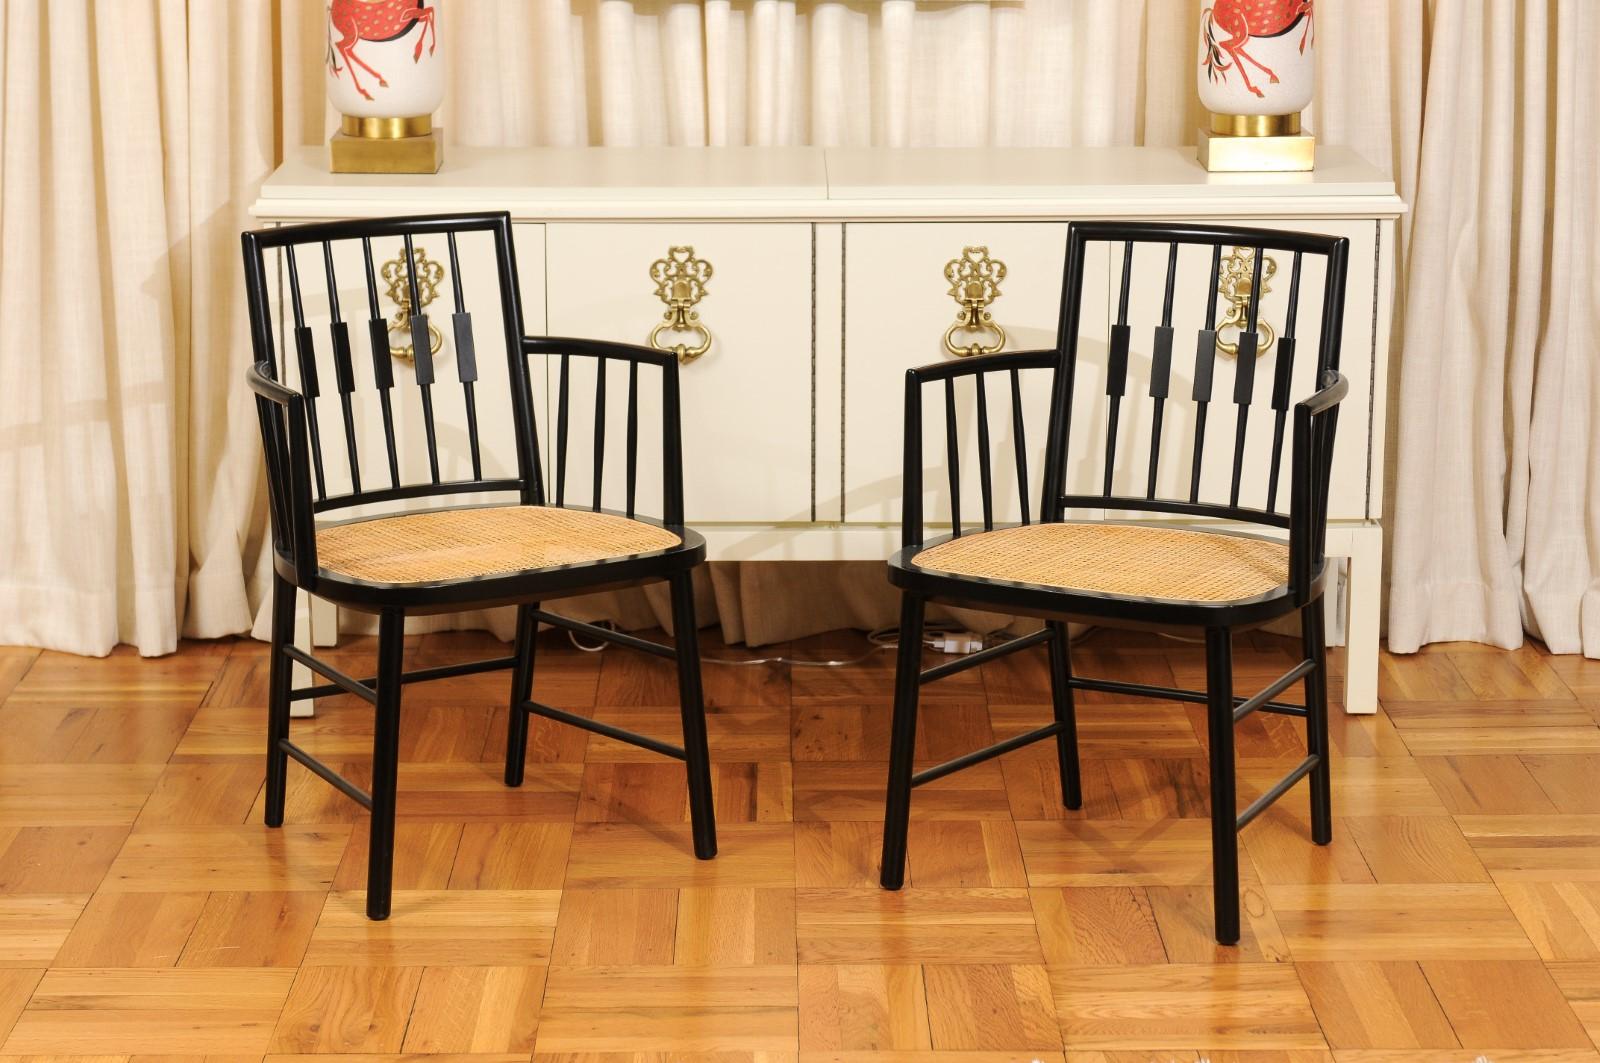 All Arms-Sterling Set of 14 Modern Windsor Cane Chairs by Michael Taylor For Sale 9